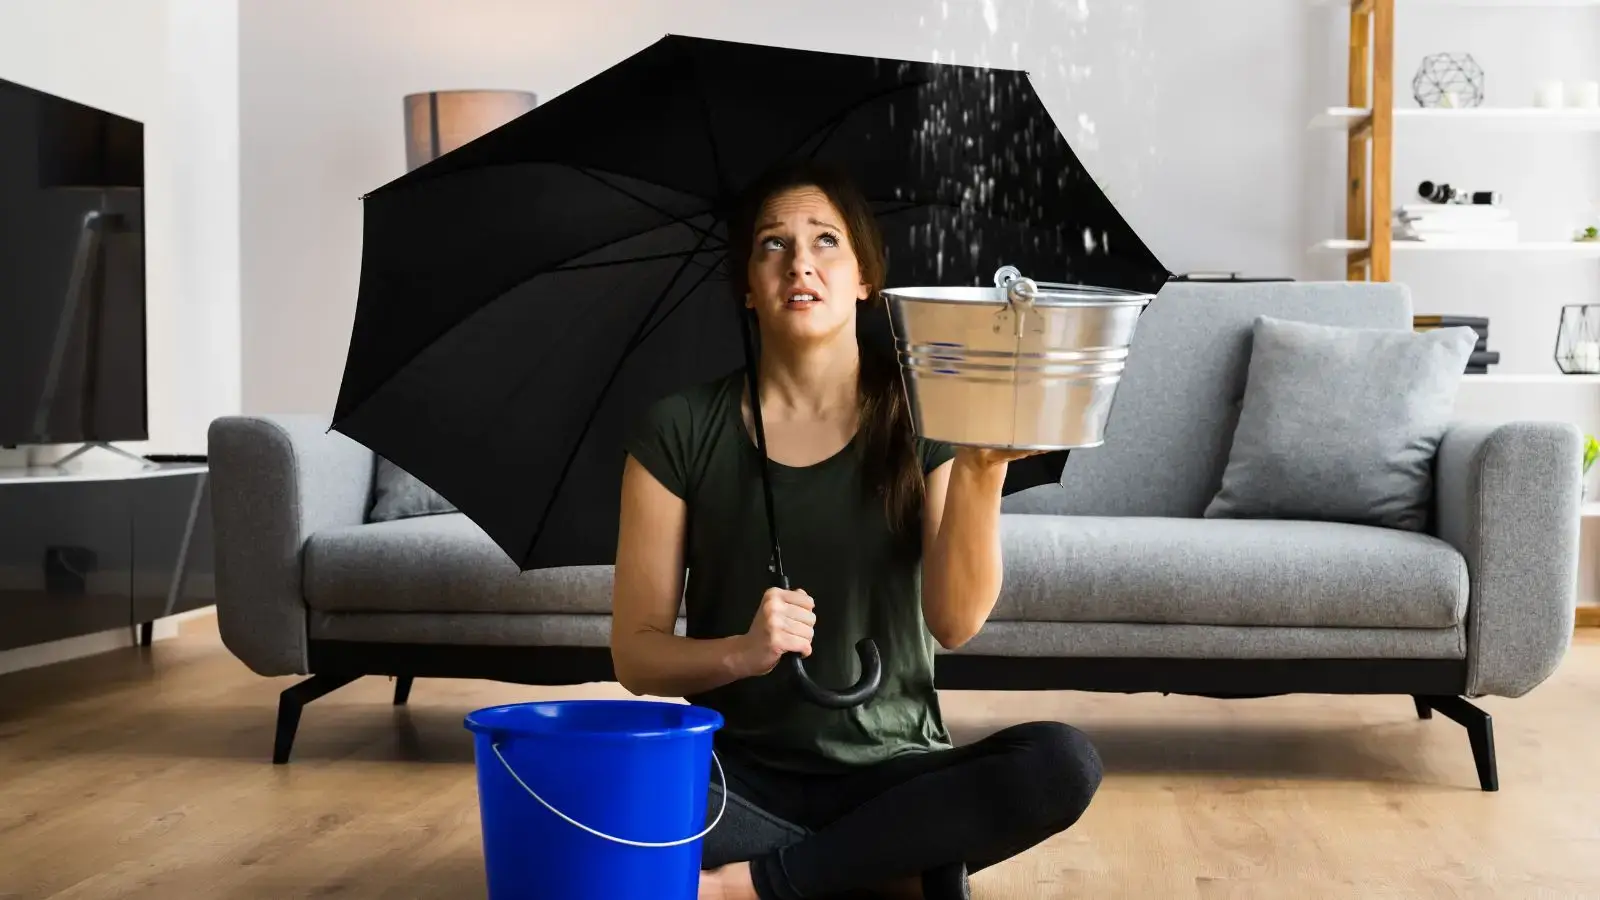 Woman holding umbrella and buckets to catch water leaks in living room, highlighting the importance of APS water sensor alarms